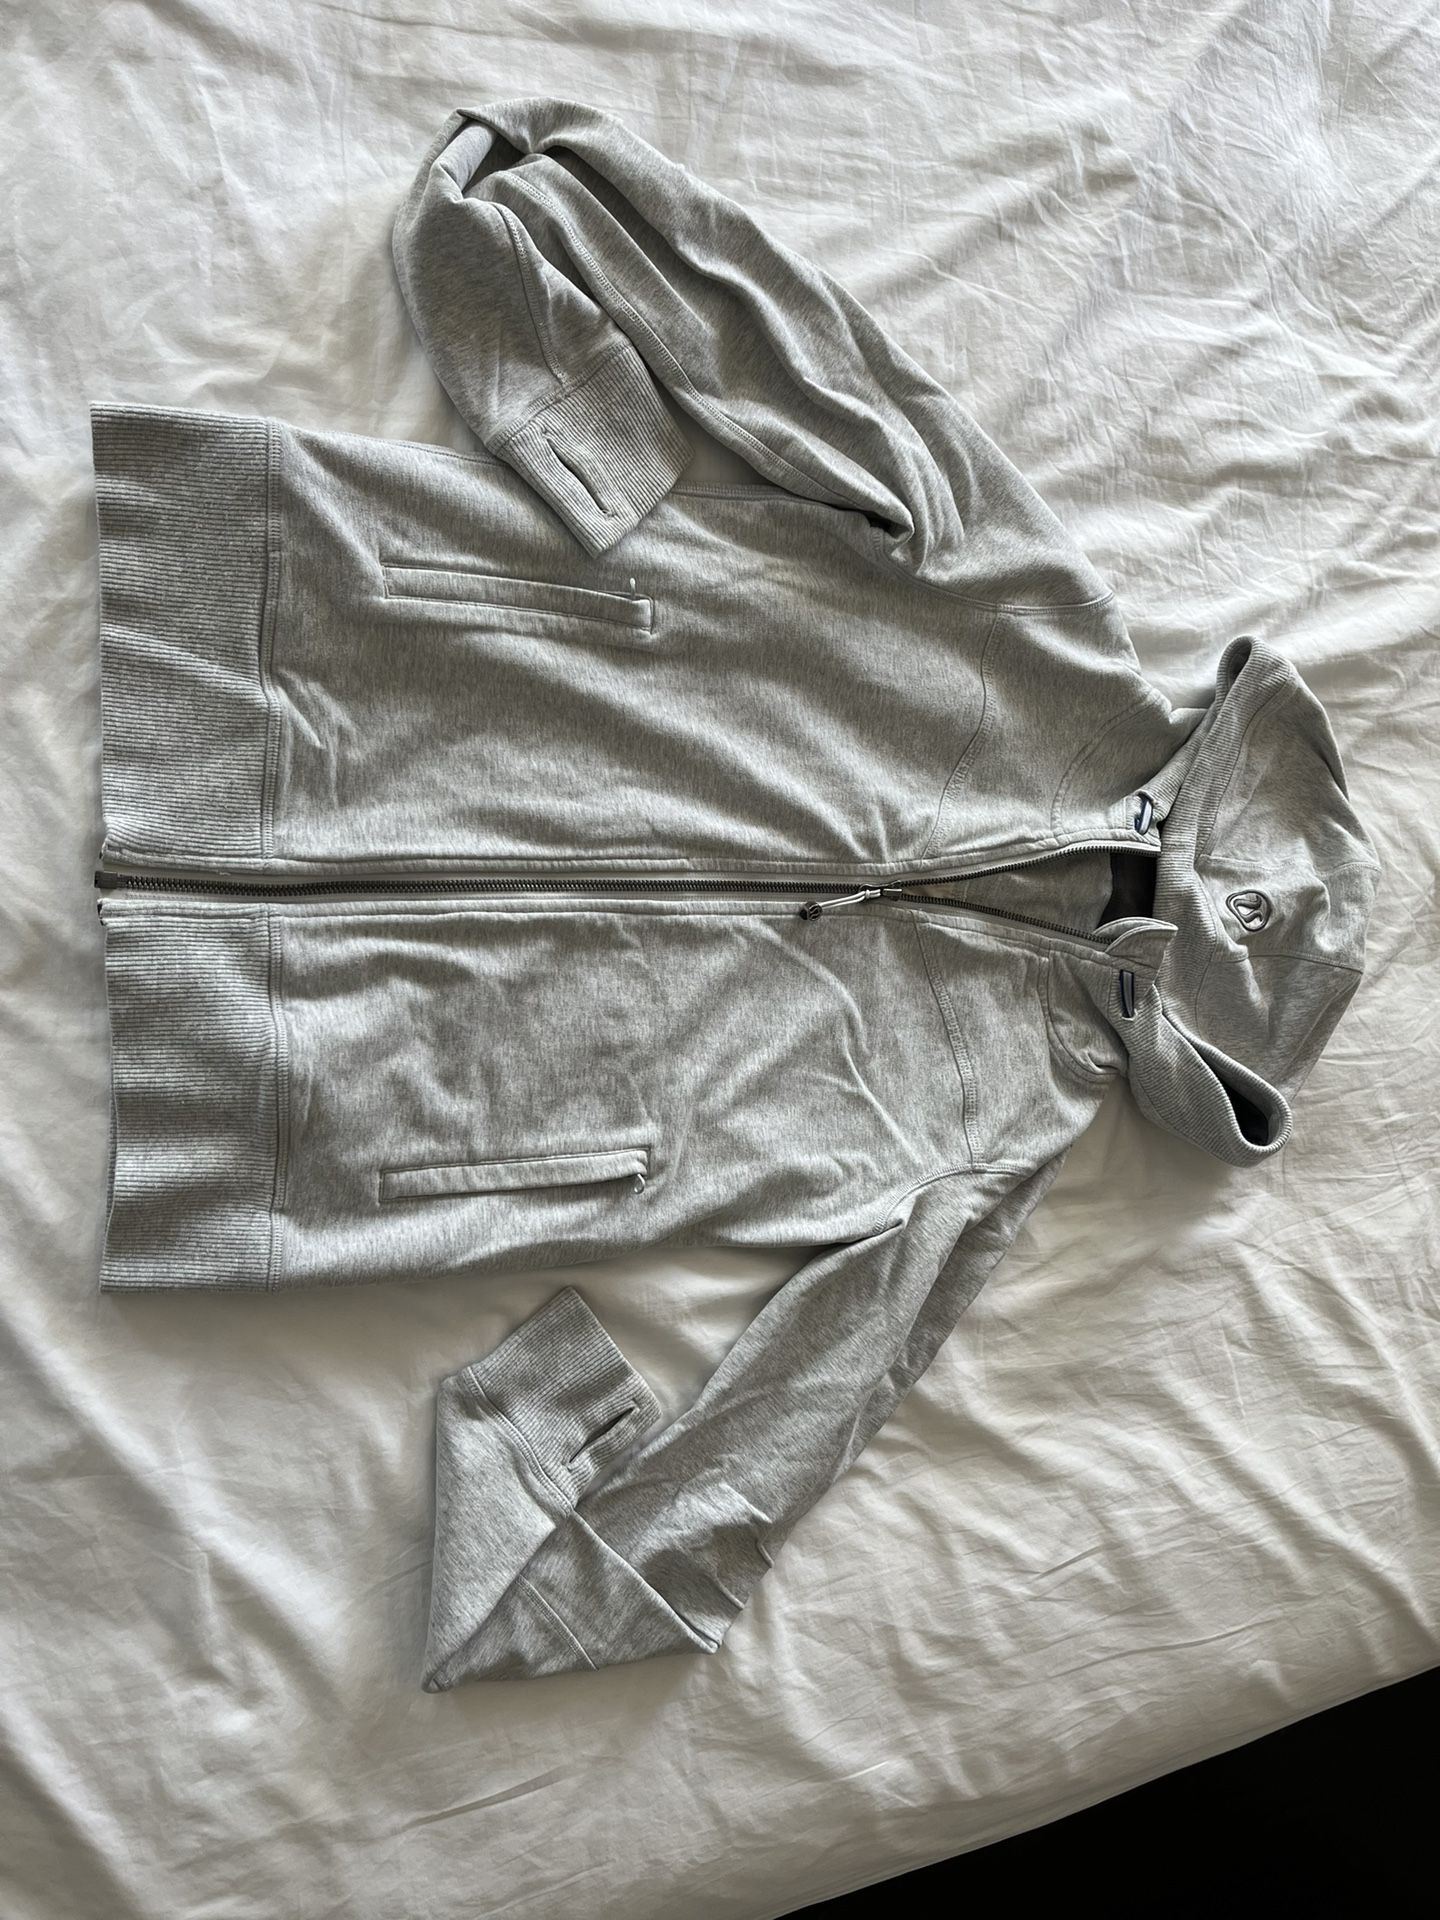 Lululemon scuba hoodie zip up size 4 (small) chartreuse/green/yellow for  Sale in Redmond, WA - OfferUp